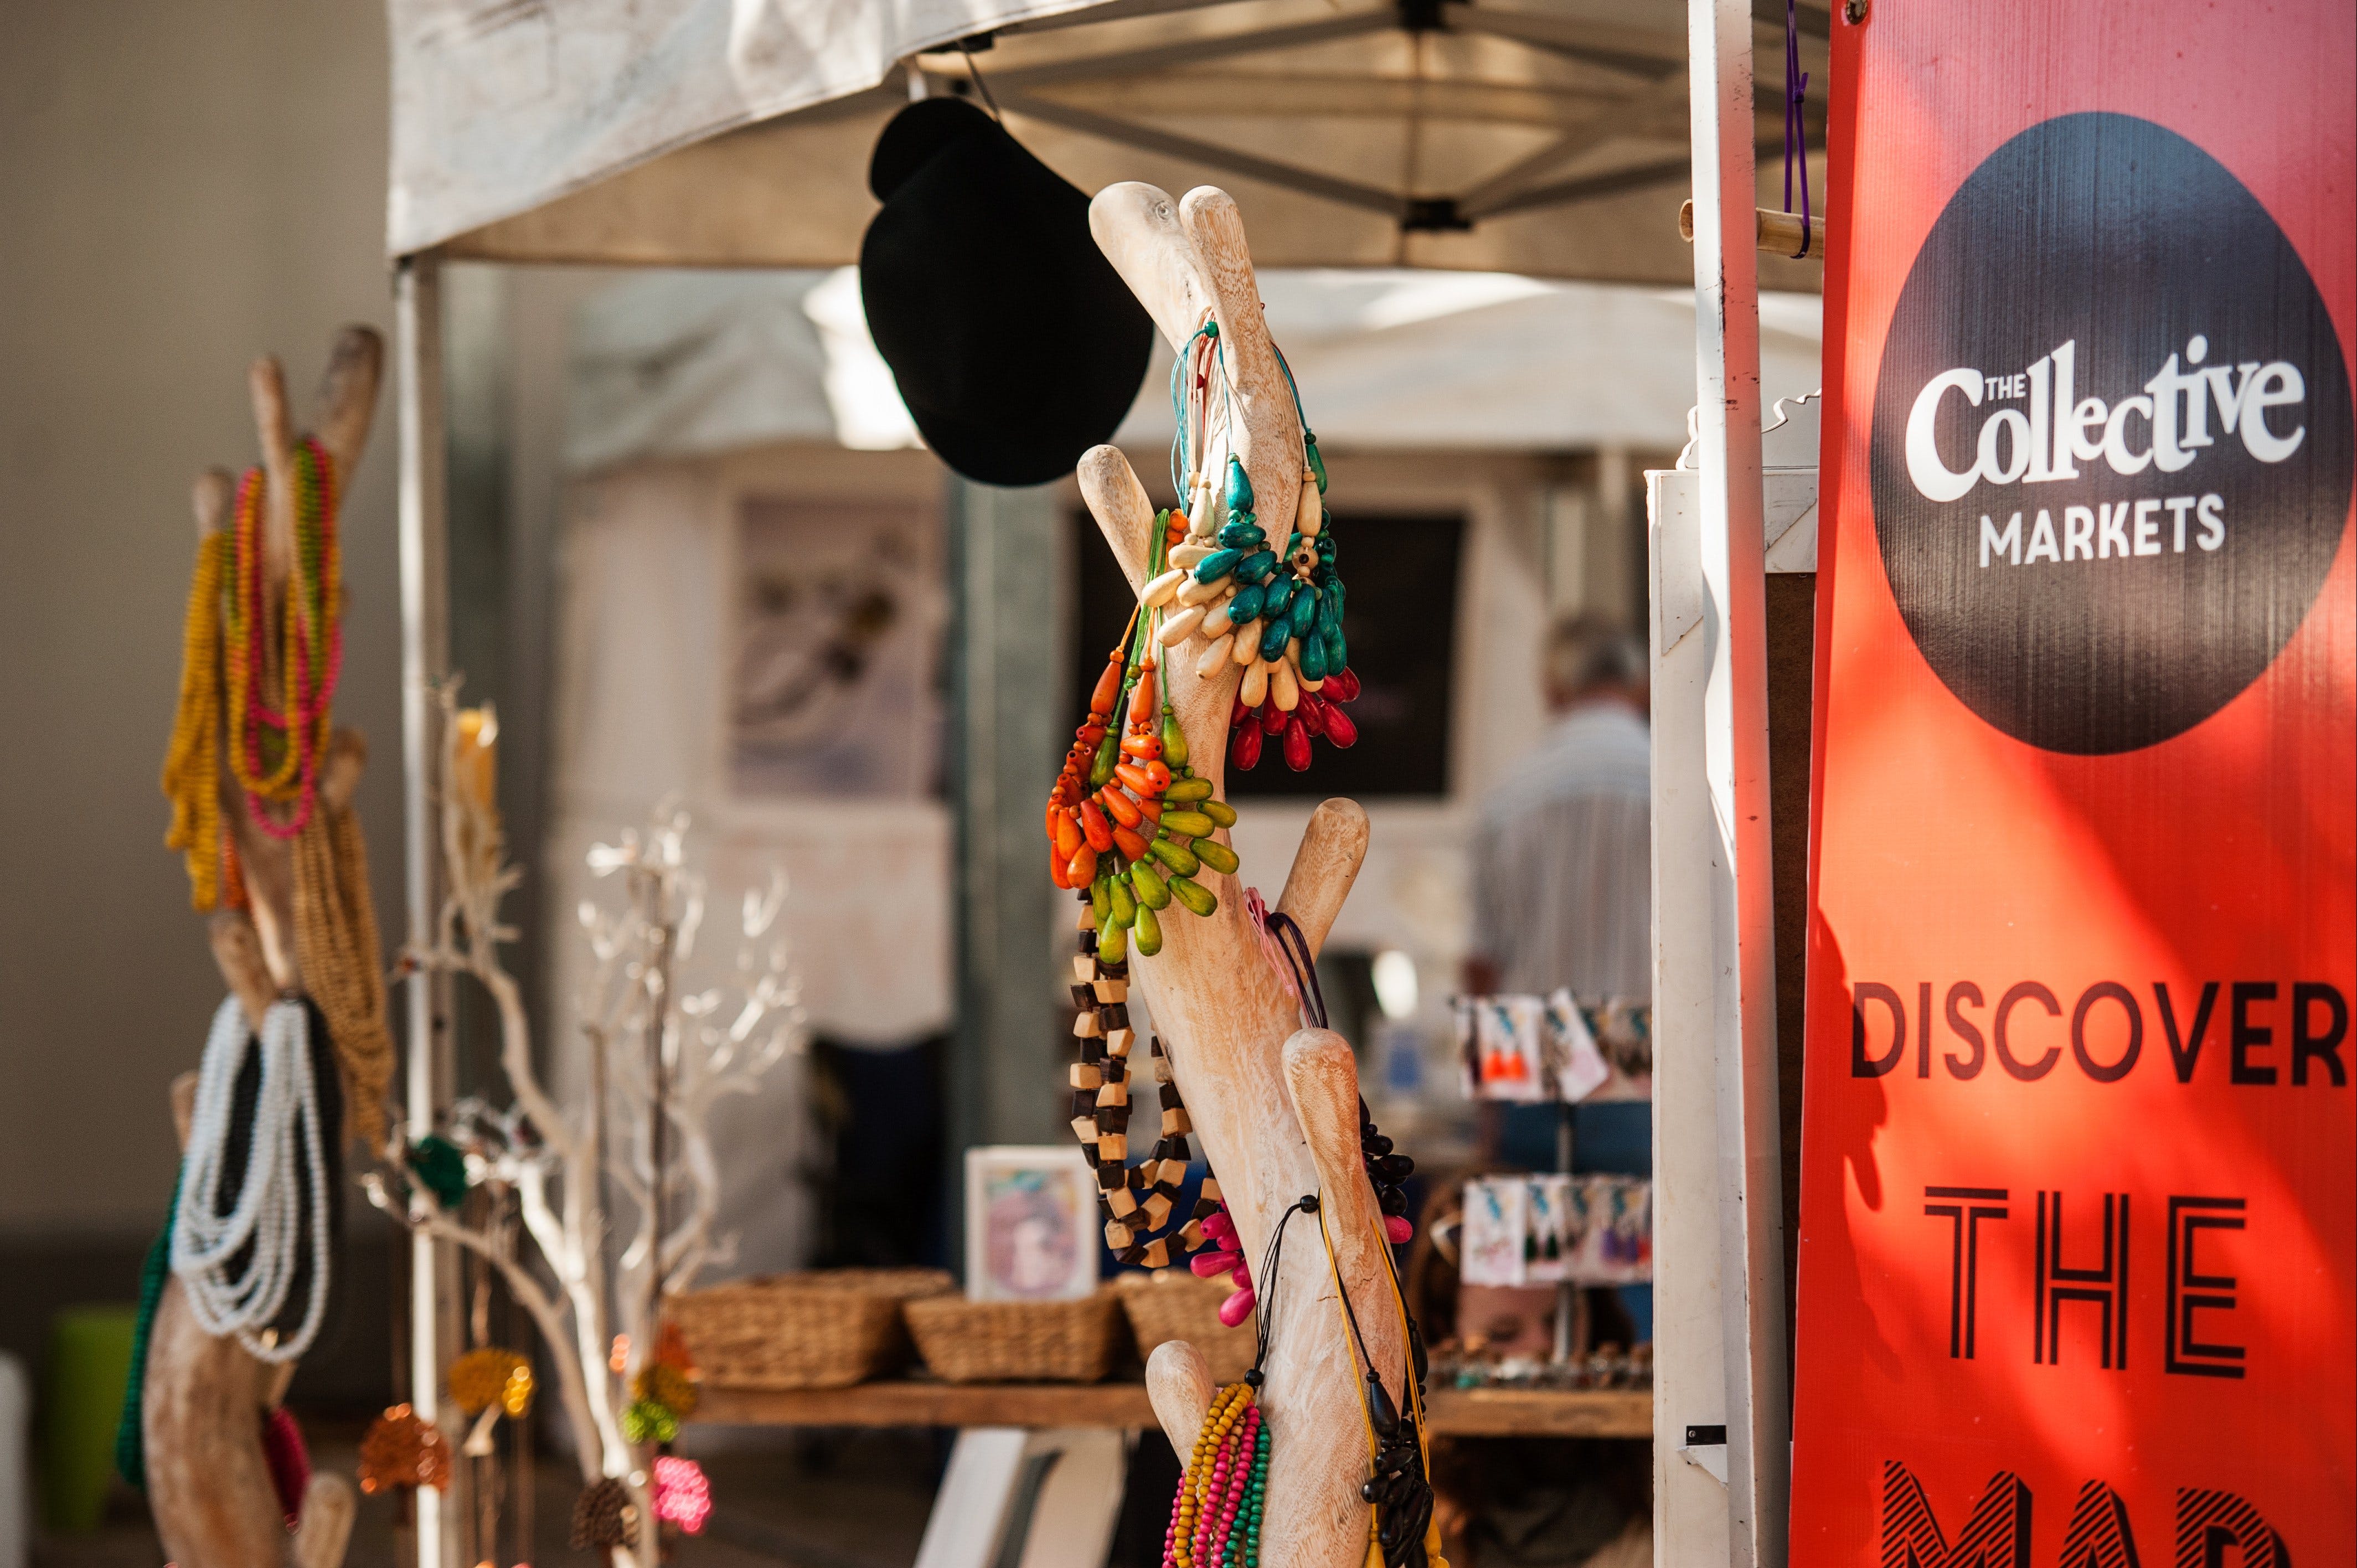 South Bank Collective Markets - Redcliffe Tourism